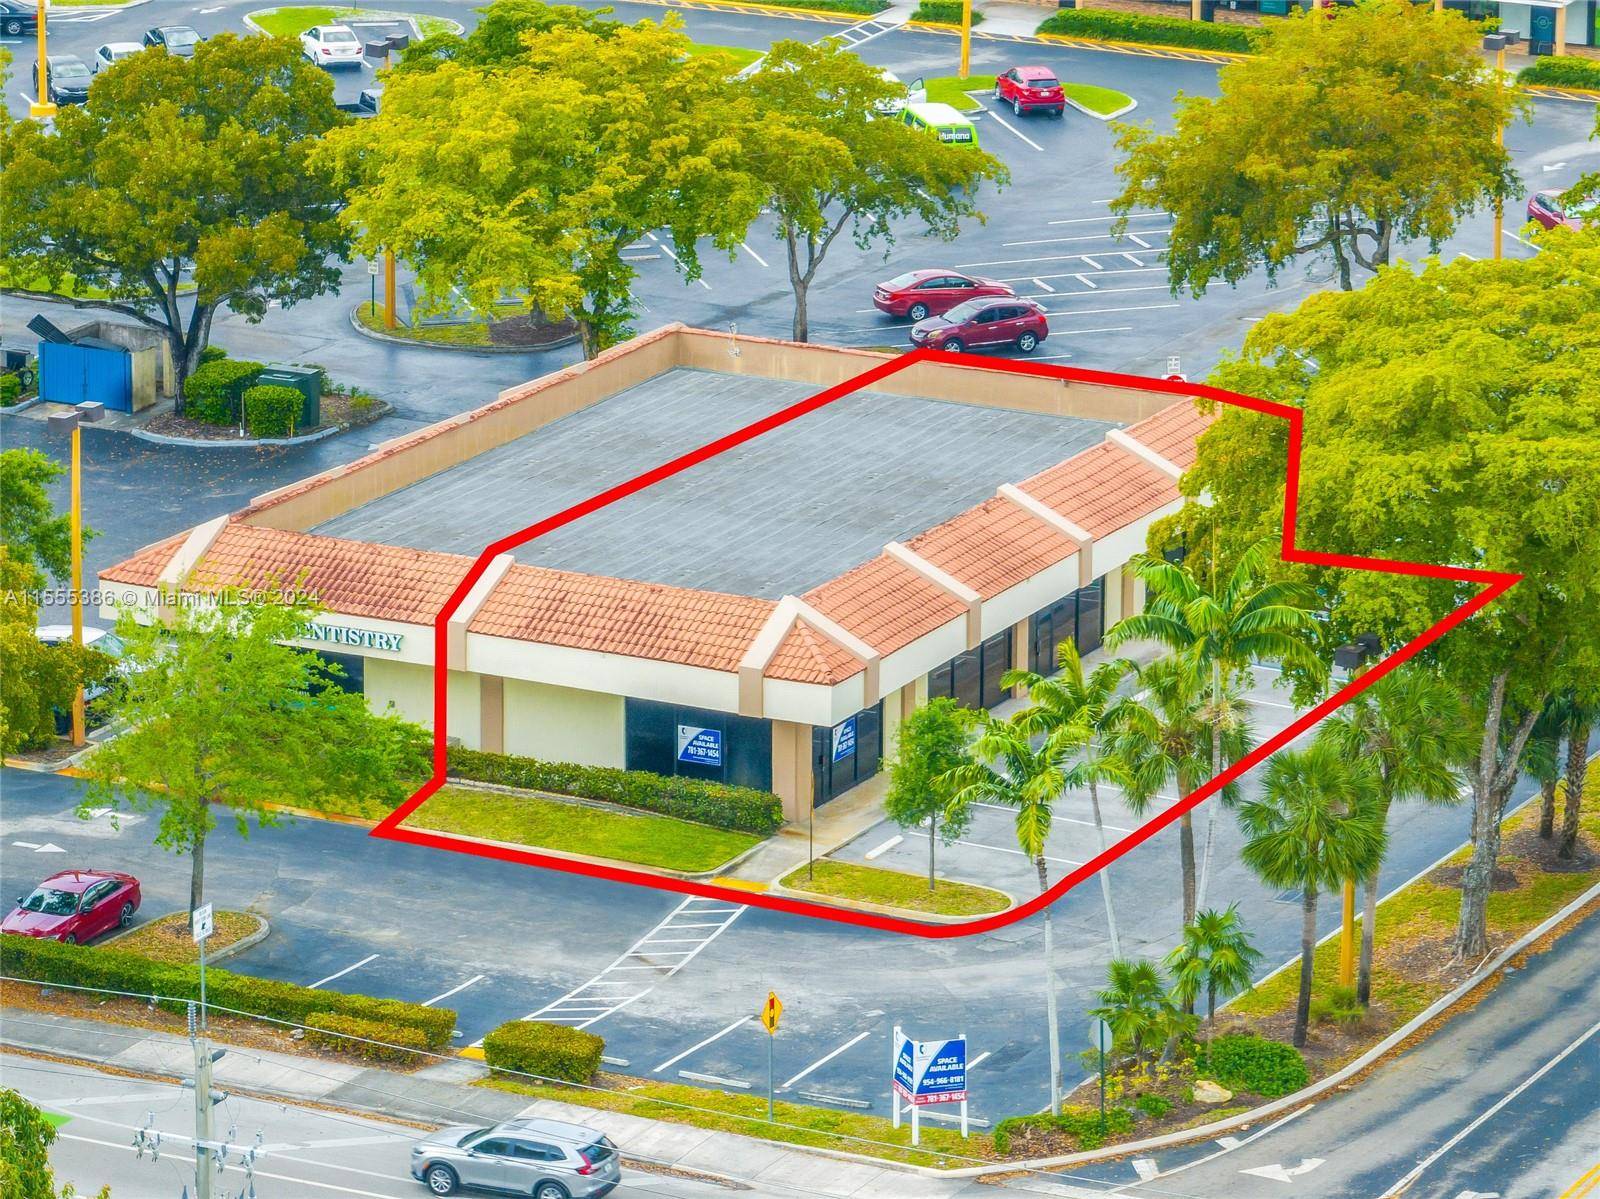 Open your business in the heart of Tamarac surrounded by major retailers like Publix McDonalds.